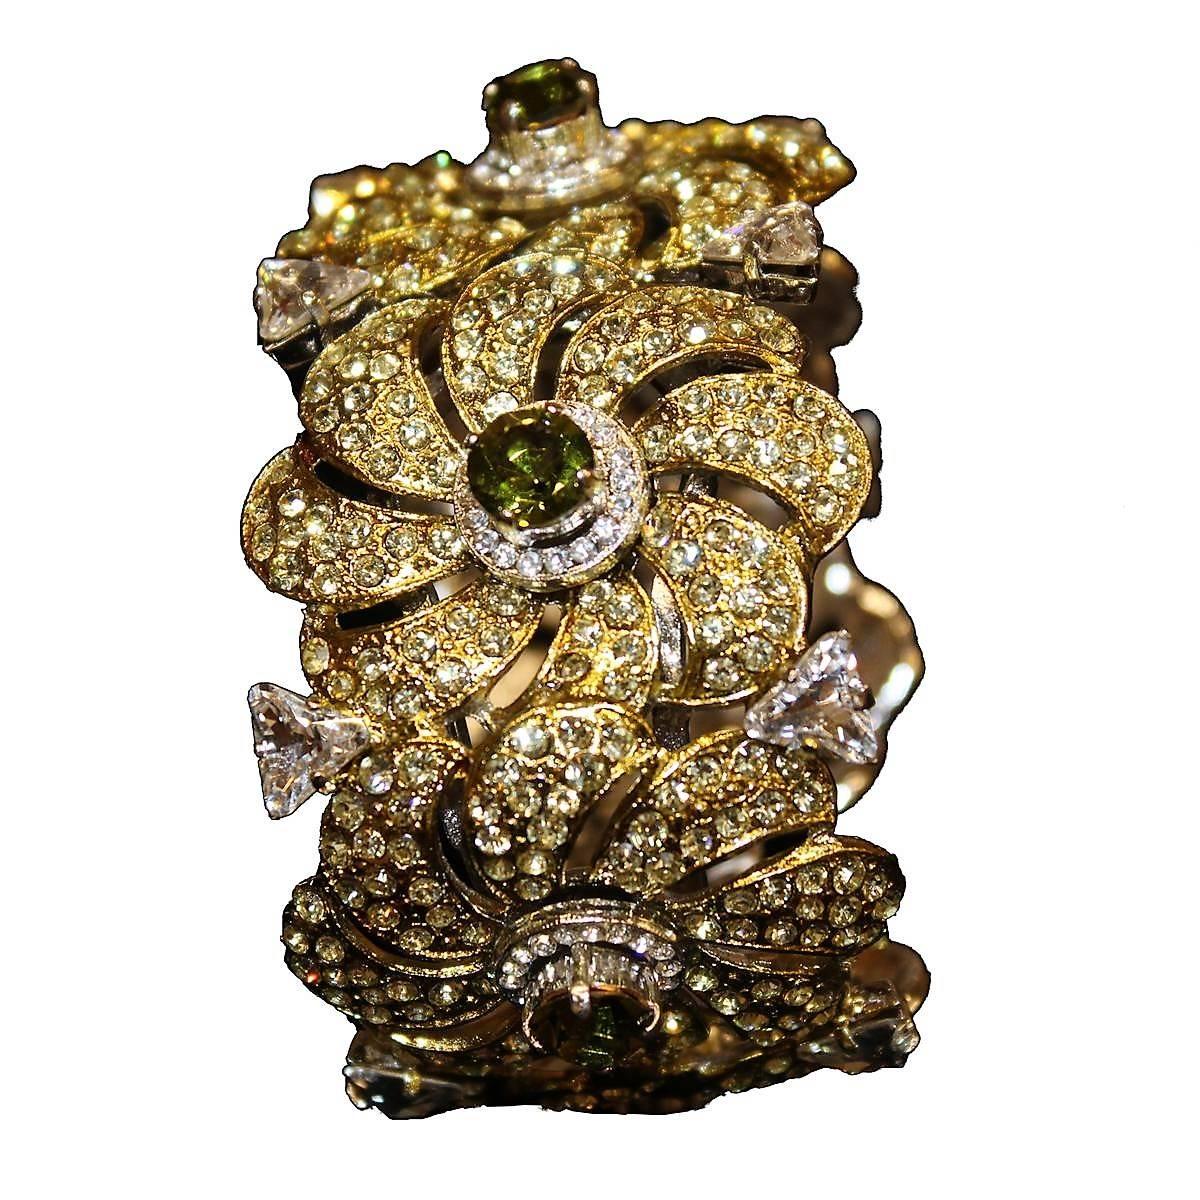 Fantastic Carlo Zini bijoux Milan bracelet
One of the world's best bijoux designers
Non allergenic rhodium
Amazing hand creation of crystals and colored rhinestones
Green color
Floral theme
Maximum width cm 4 (1.57 inches)
Wrist size cm 17 (6.7